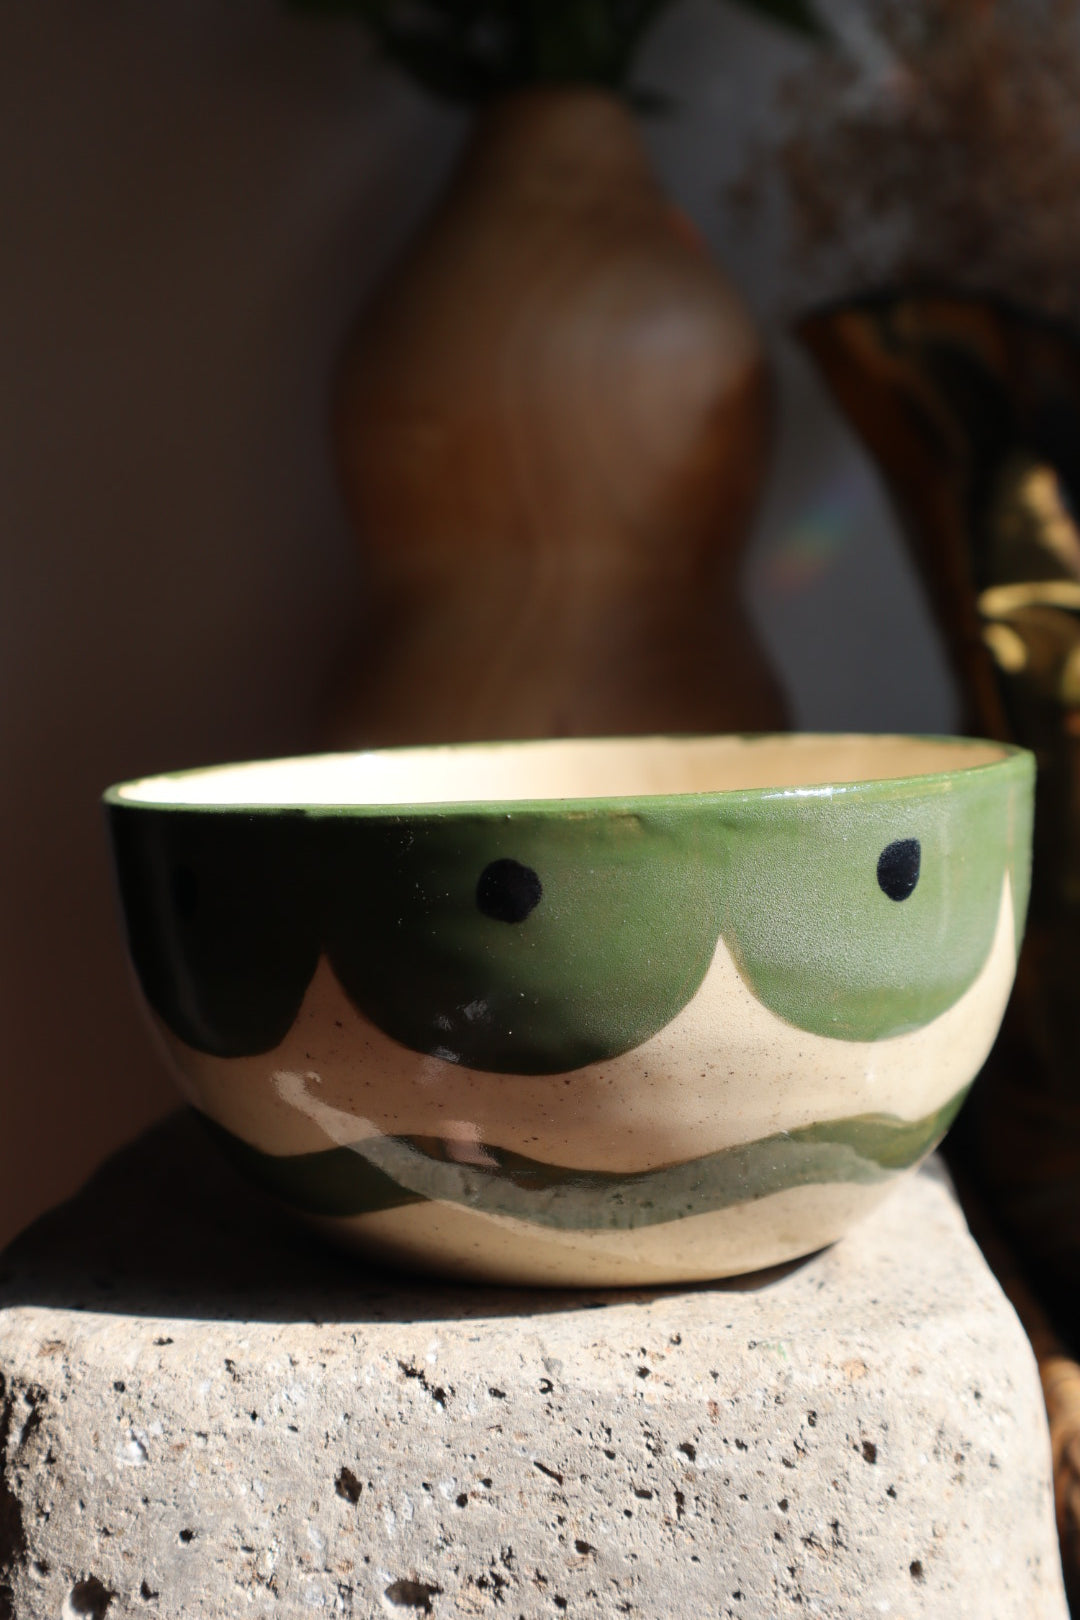 Hand-Pained General Purpose Bowl